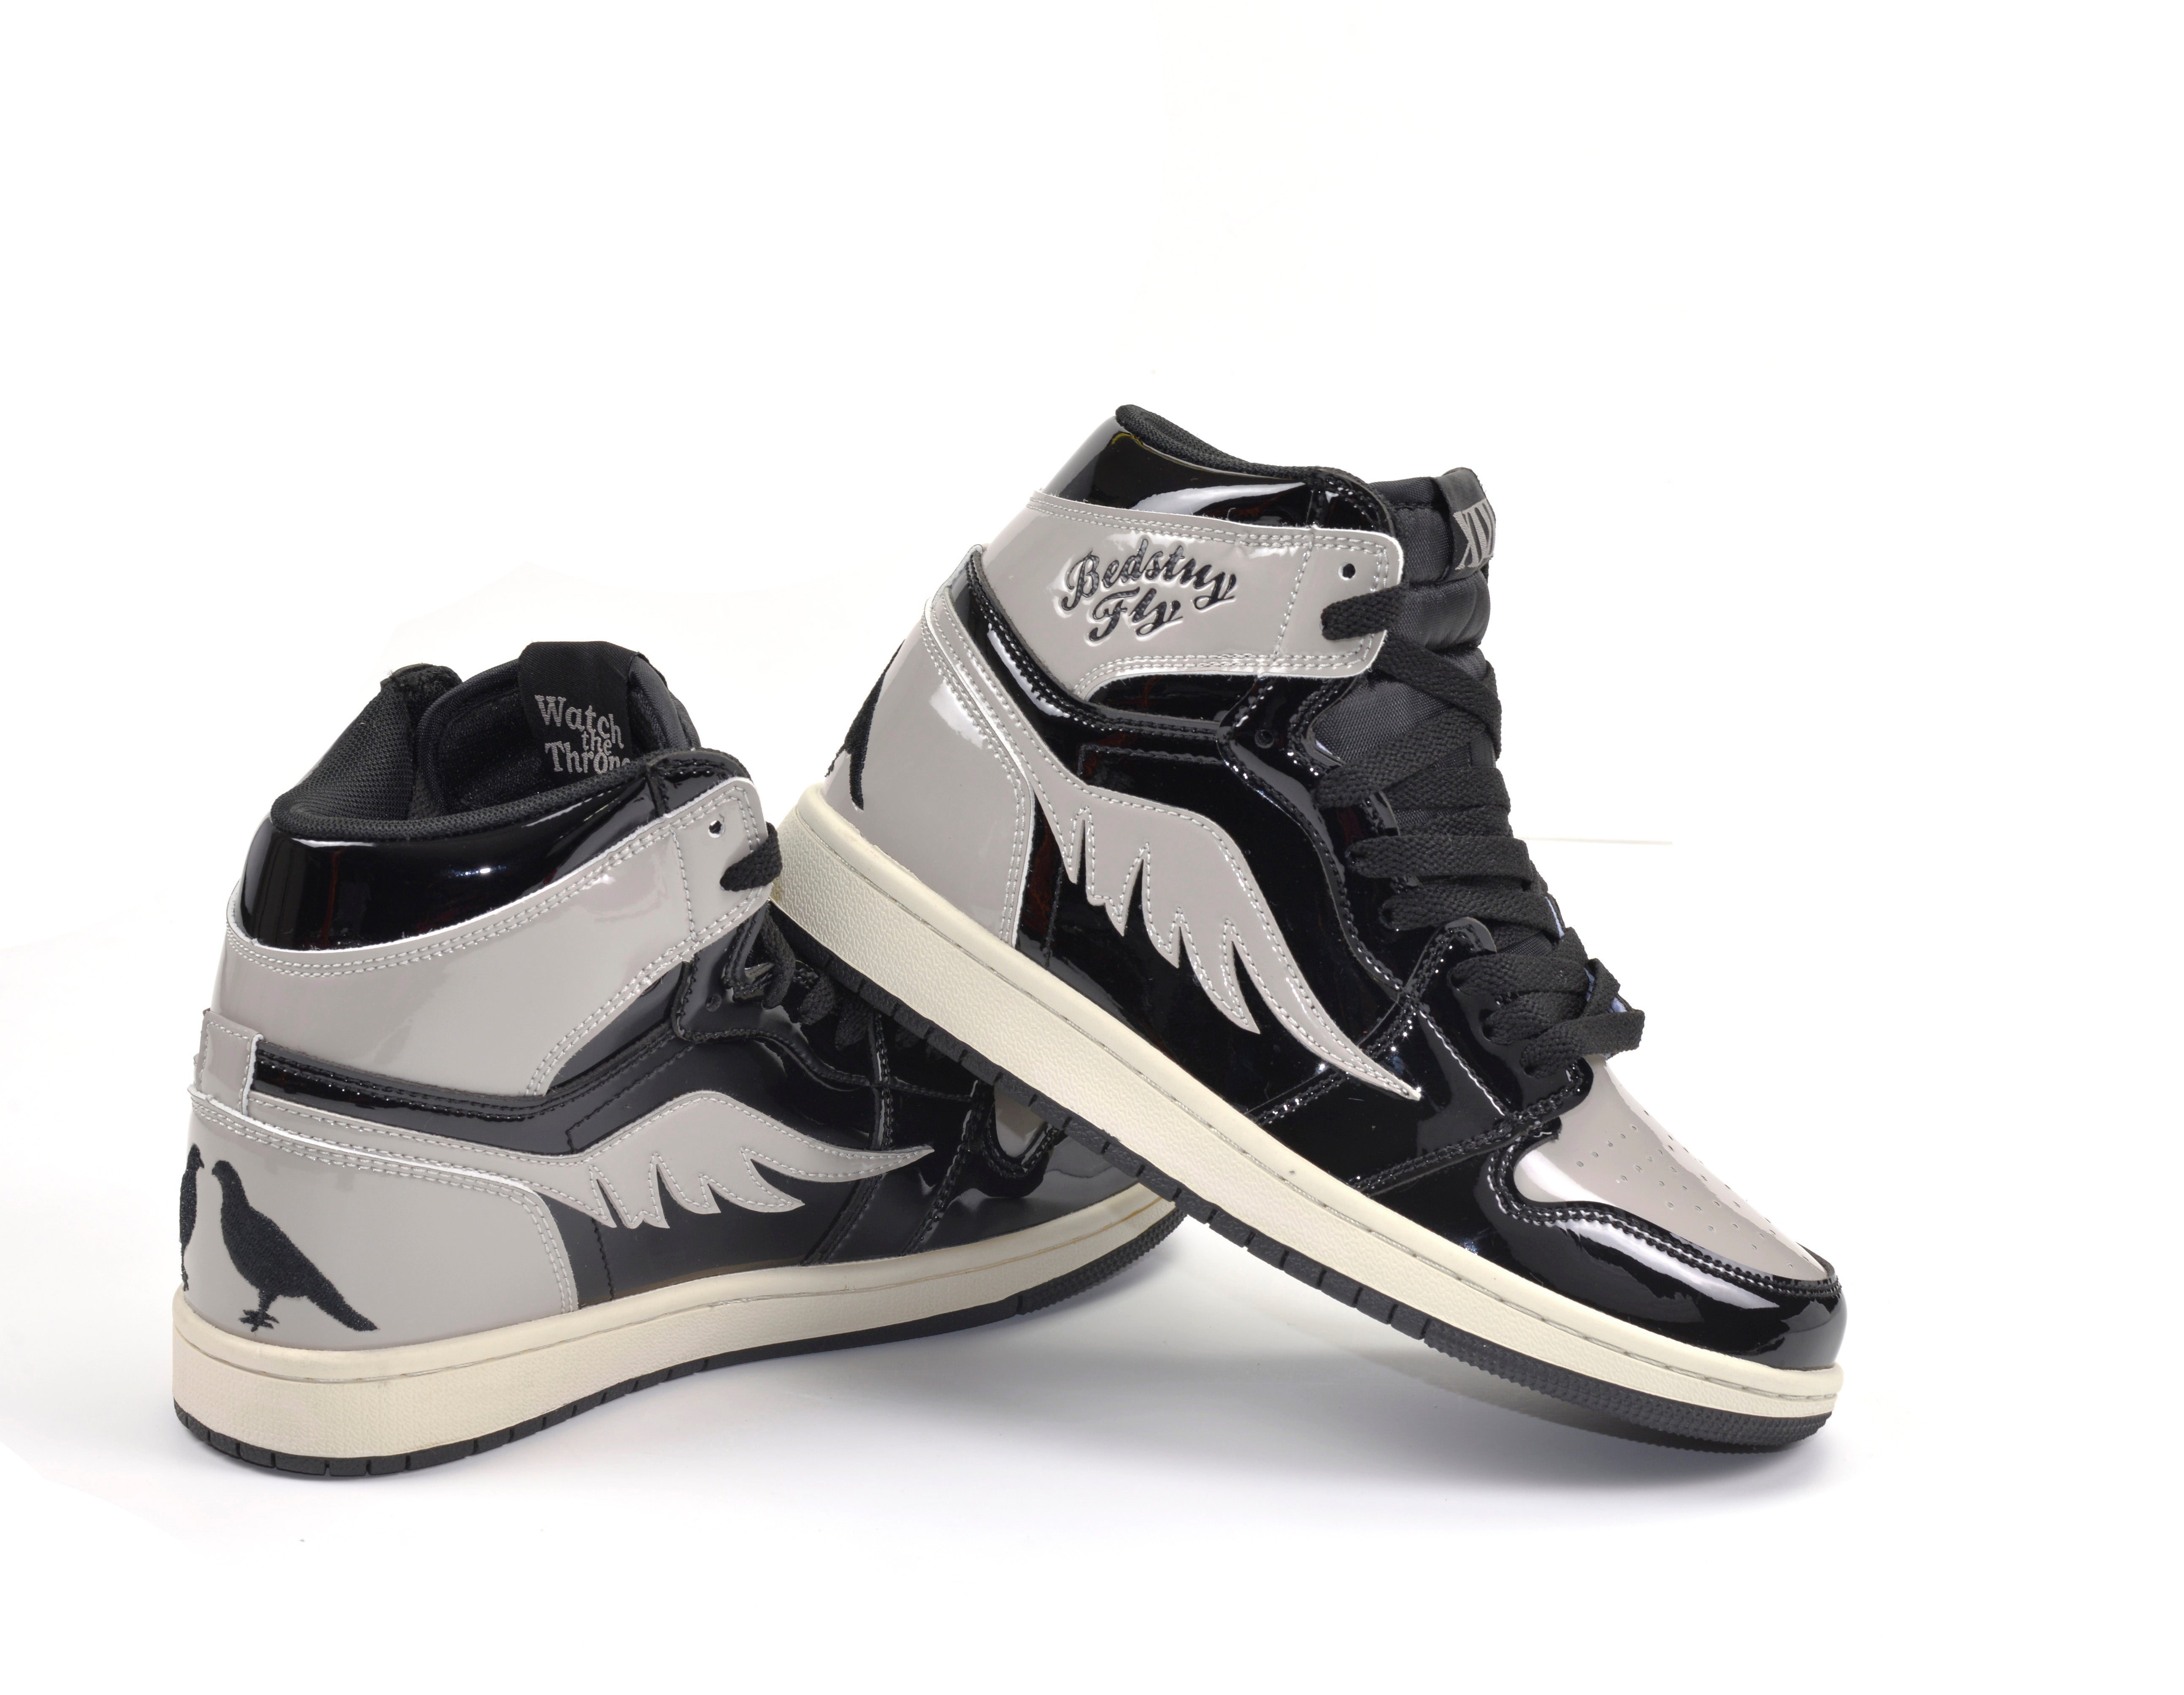 Big Wings BLK/GRY 5